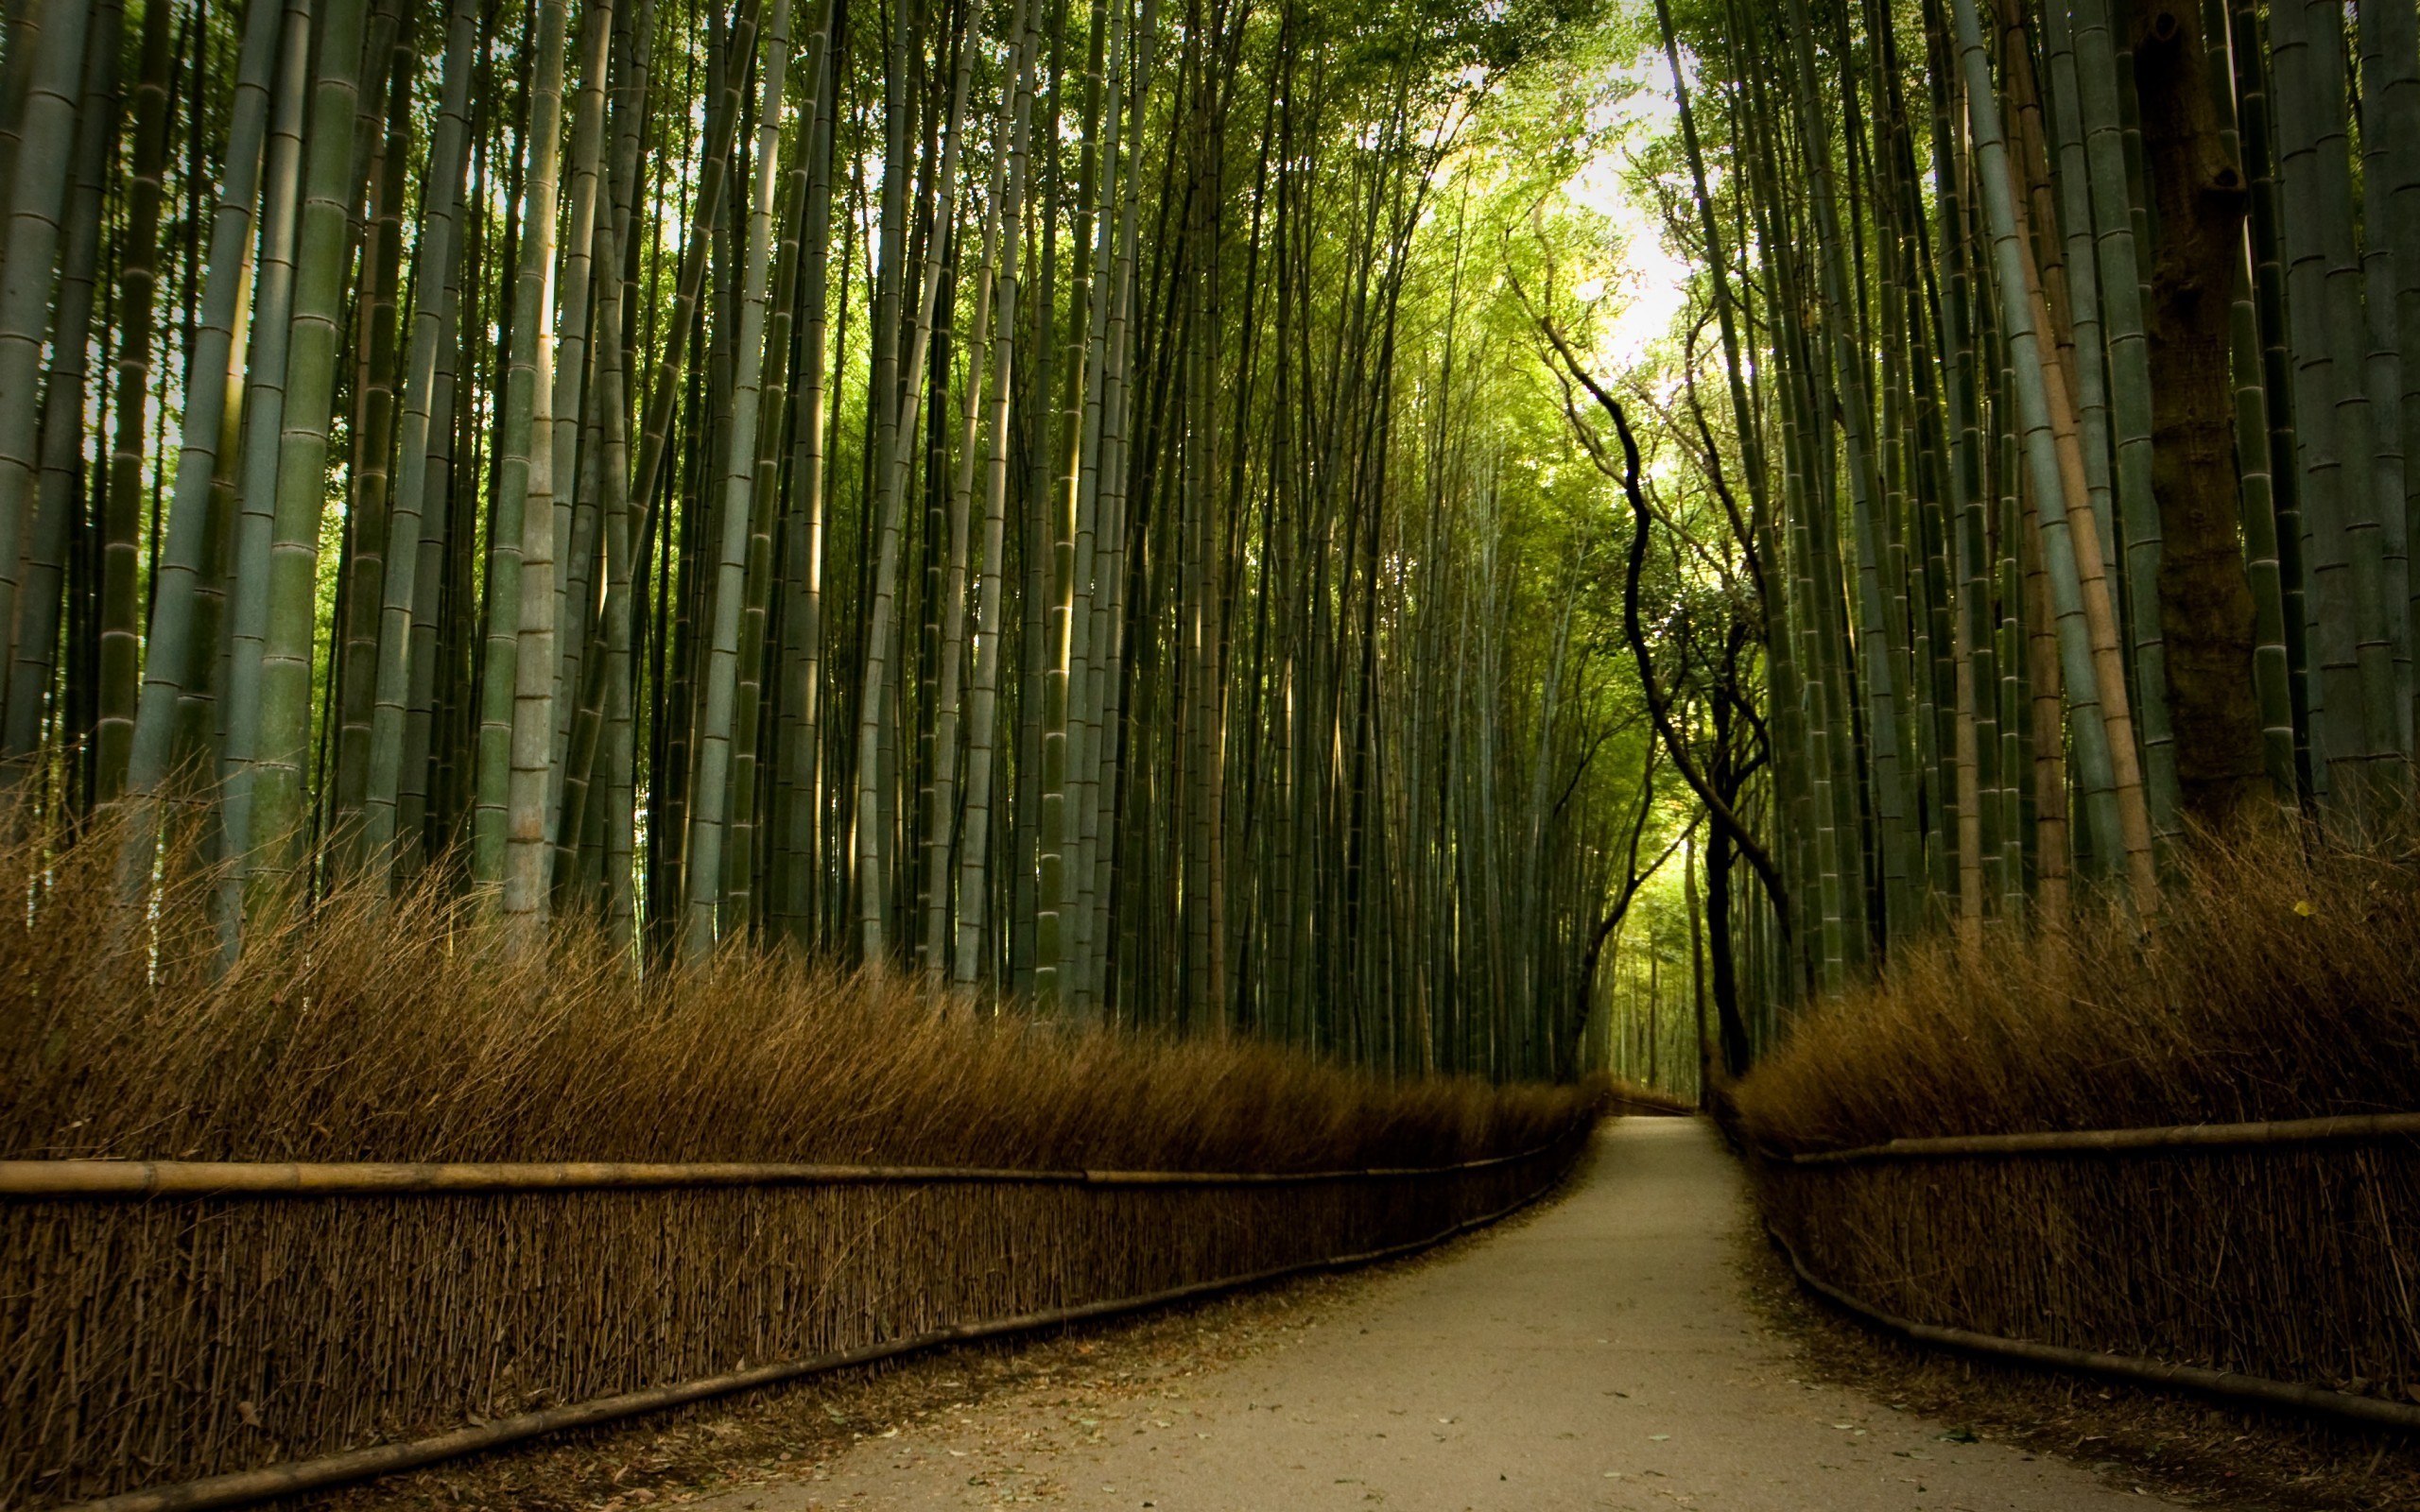 General 2560x1600 nature forest trees path street road dirt road bamboo